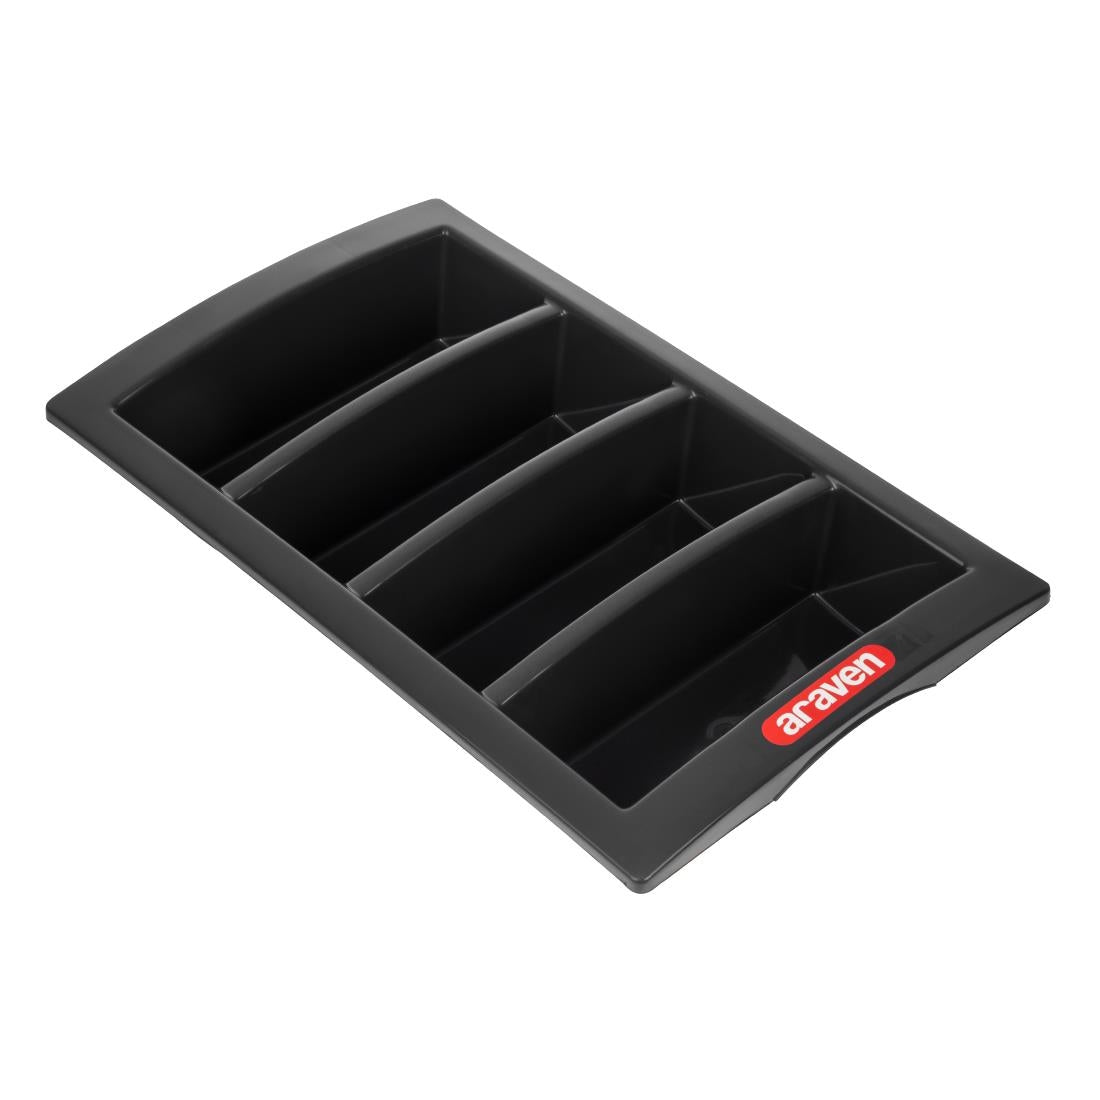 Araven Stackable Cutlery Tray JD Catering Equipment Solutions Ltd